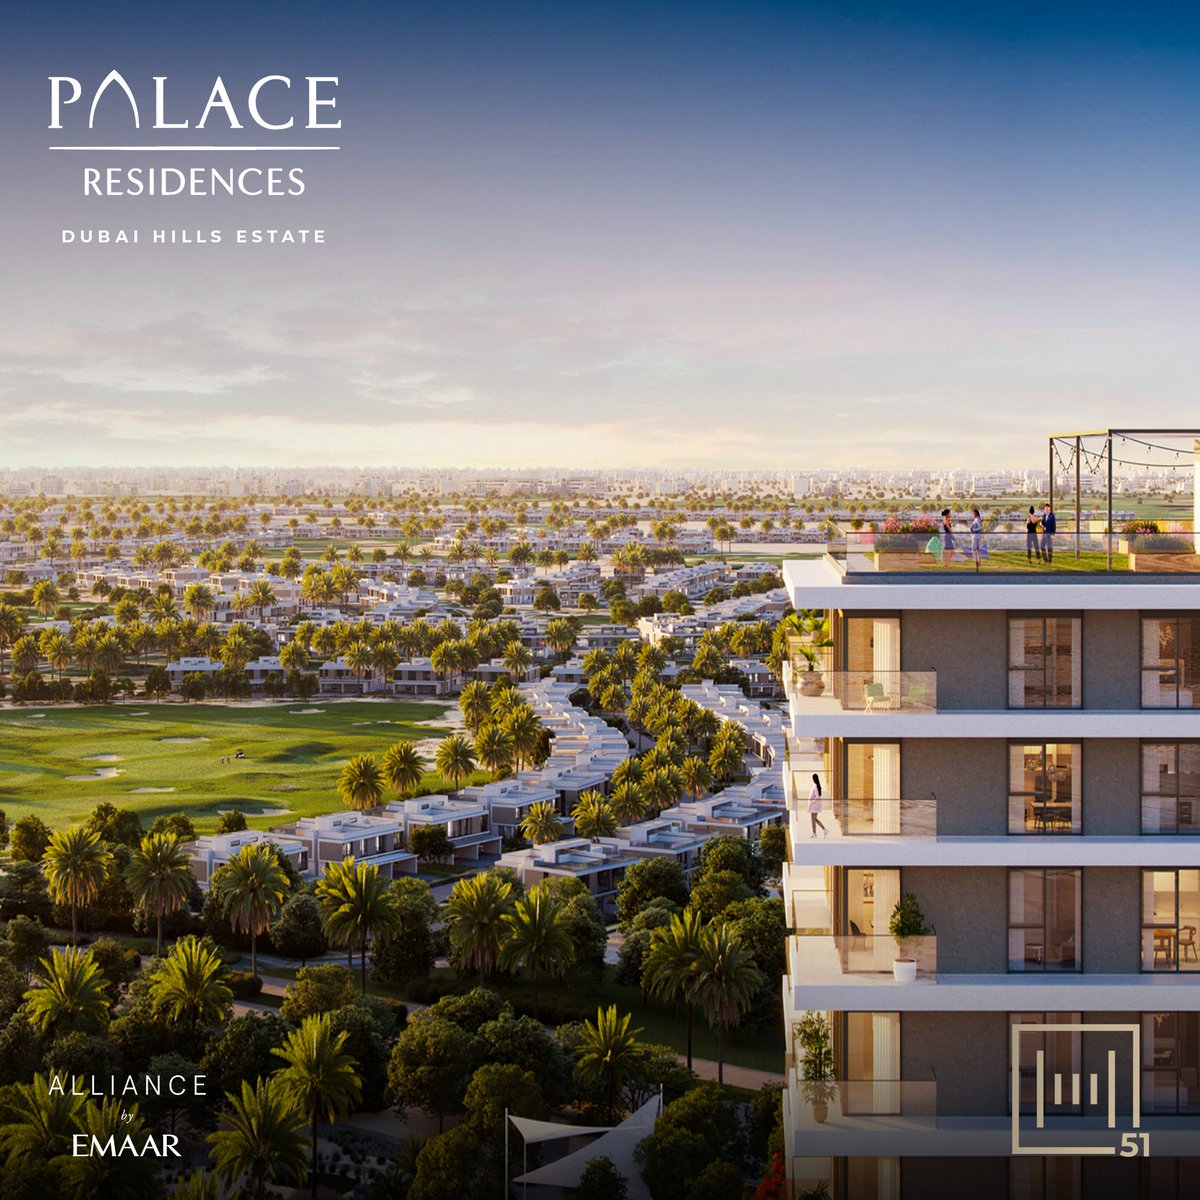 Emaar Properties introduces Palace Residences, the premier 5-star branded residence in Dubai Hills Estate, featuring upscale apartments. 

#haus51dxb #haus51realestate #haus51 #palaceresidences #dubaihillsestate #emaarproperties #premiumamenities #natureliving #luxuryapartments